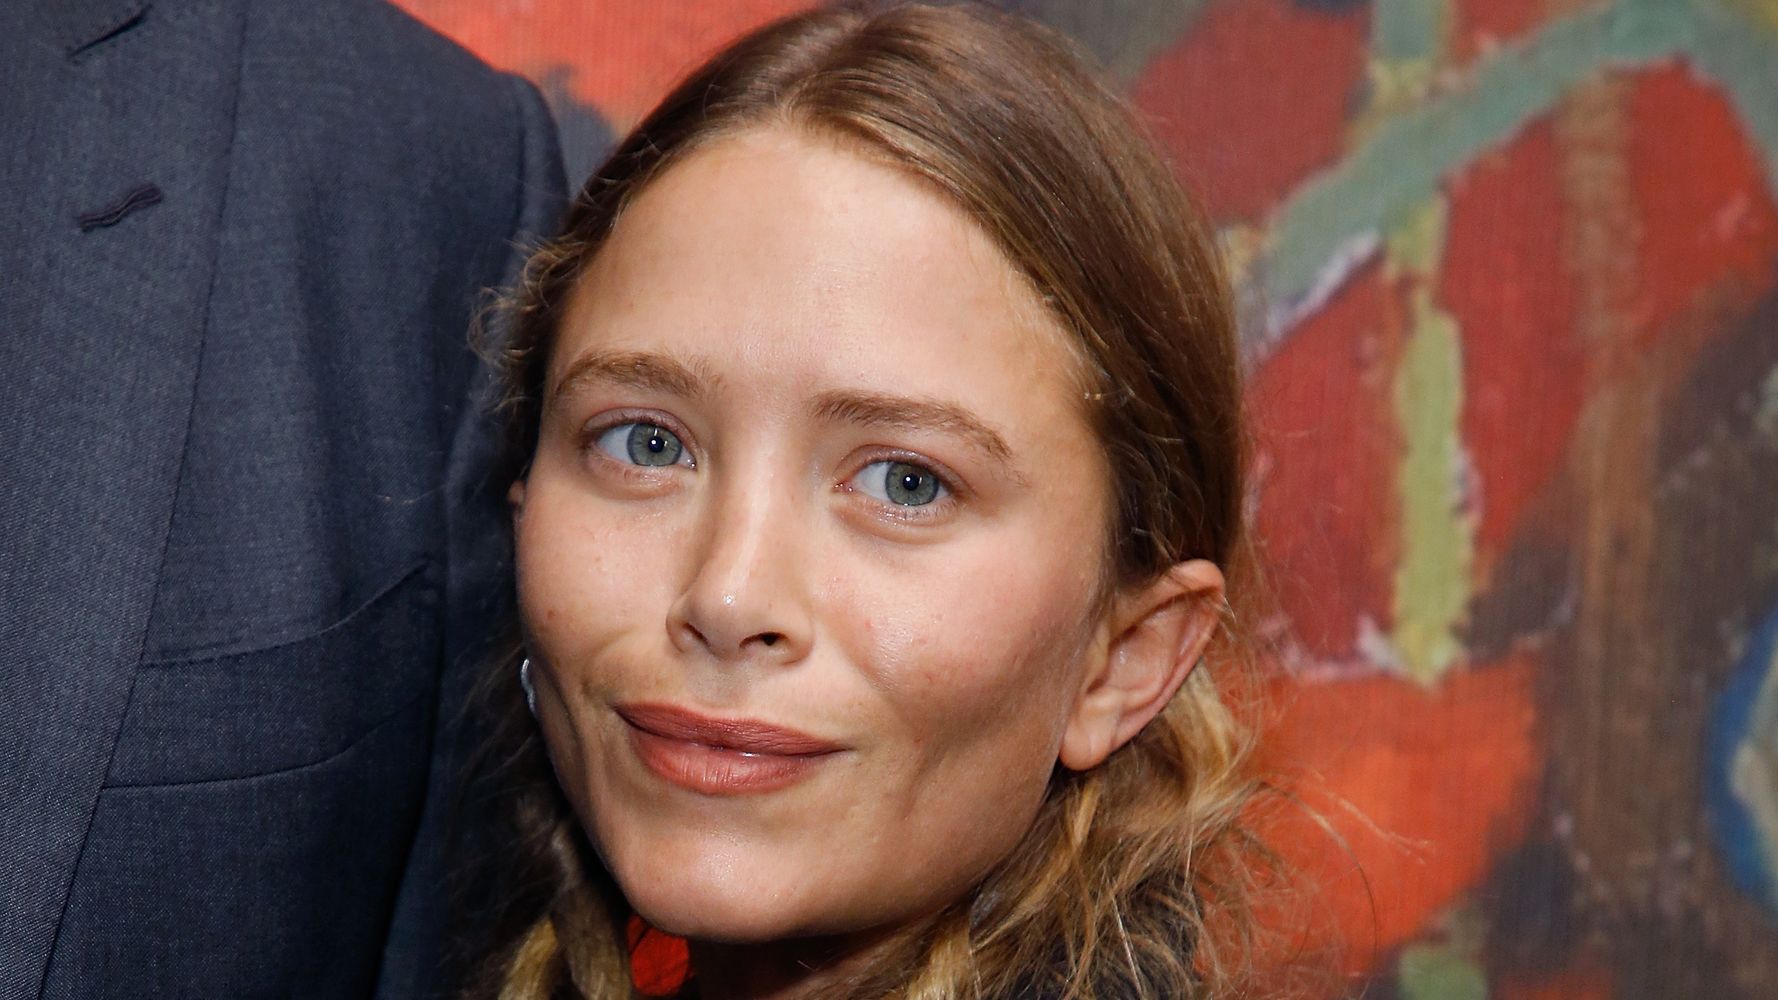 Mary-Kate Olsen Wearing Louis Vuitton Archlight Sneakers